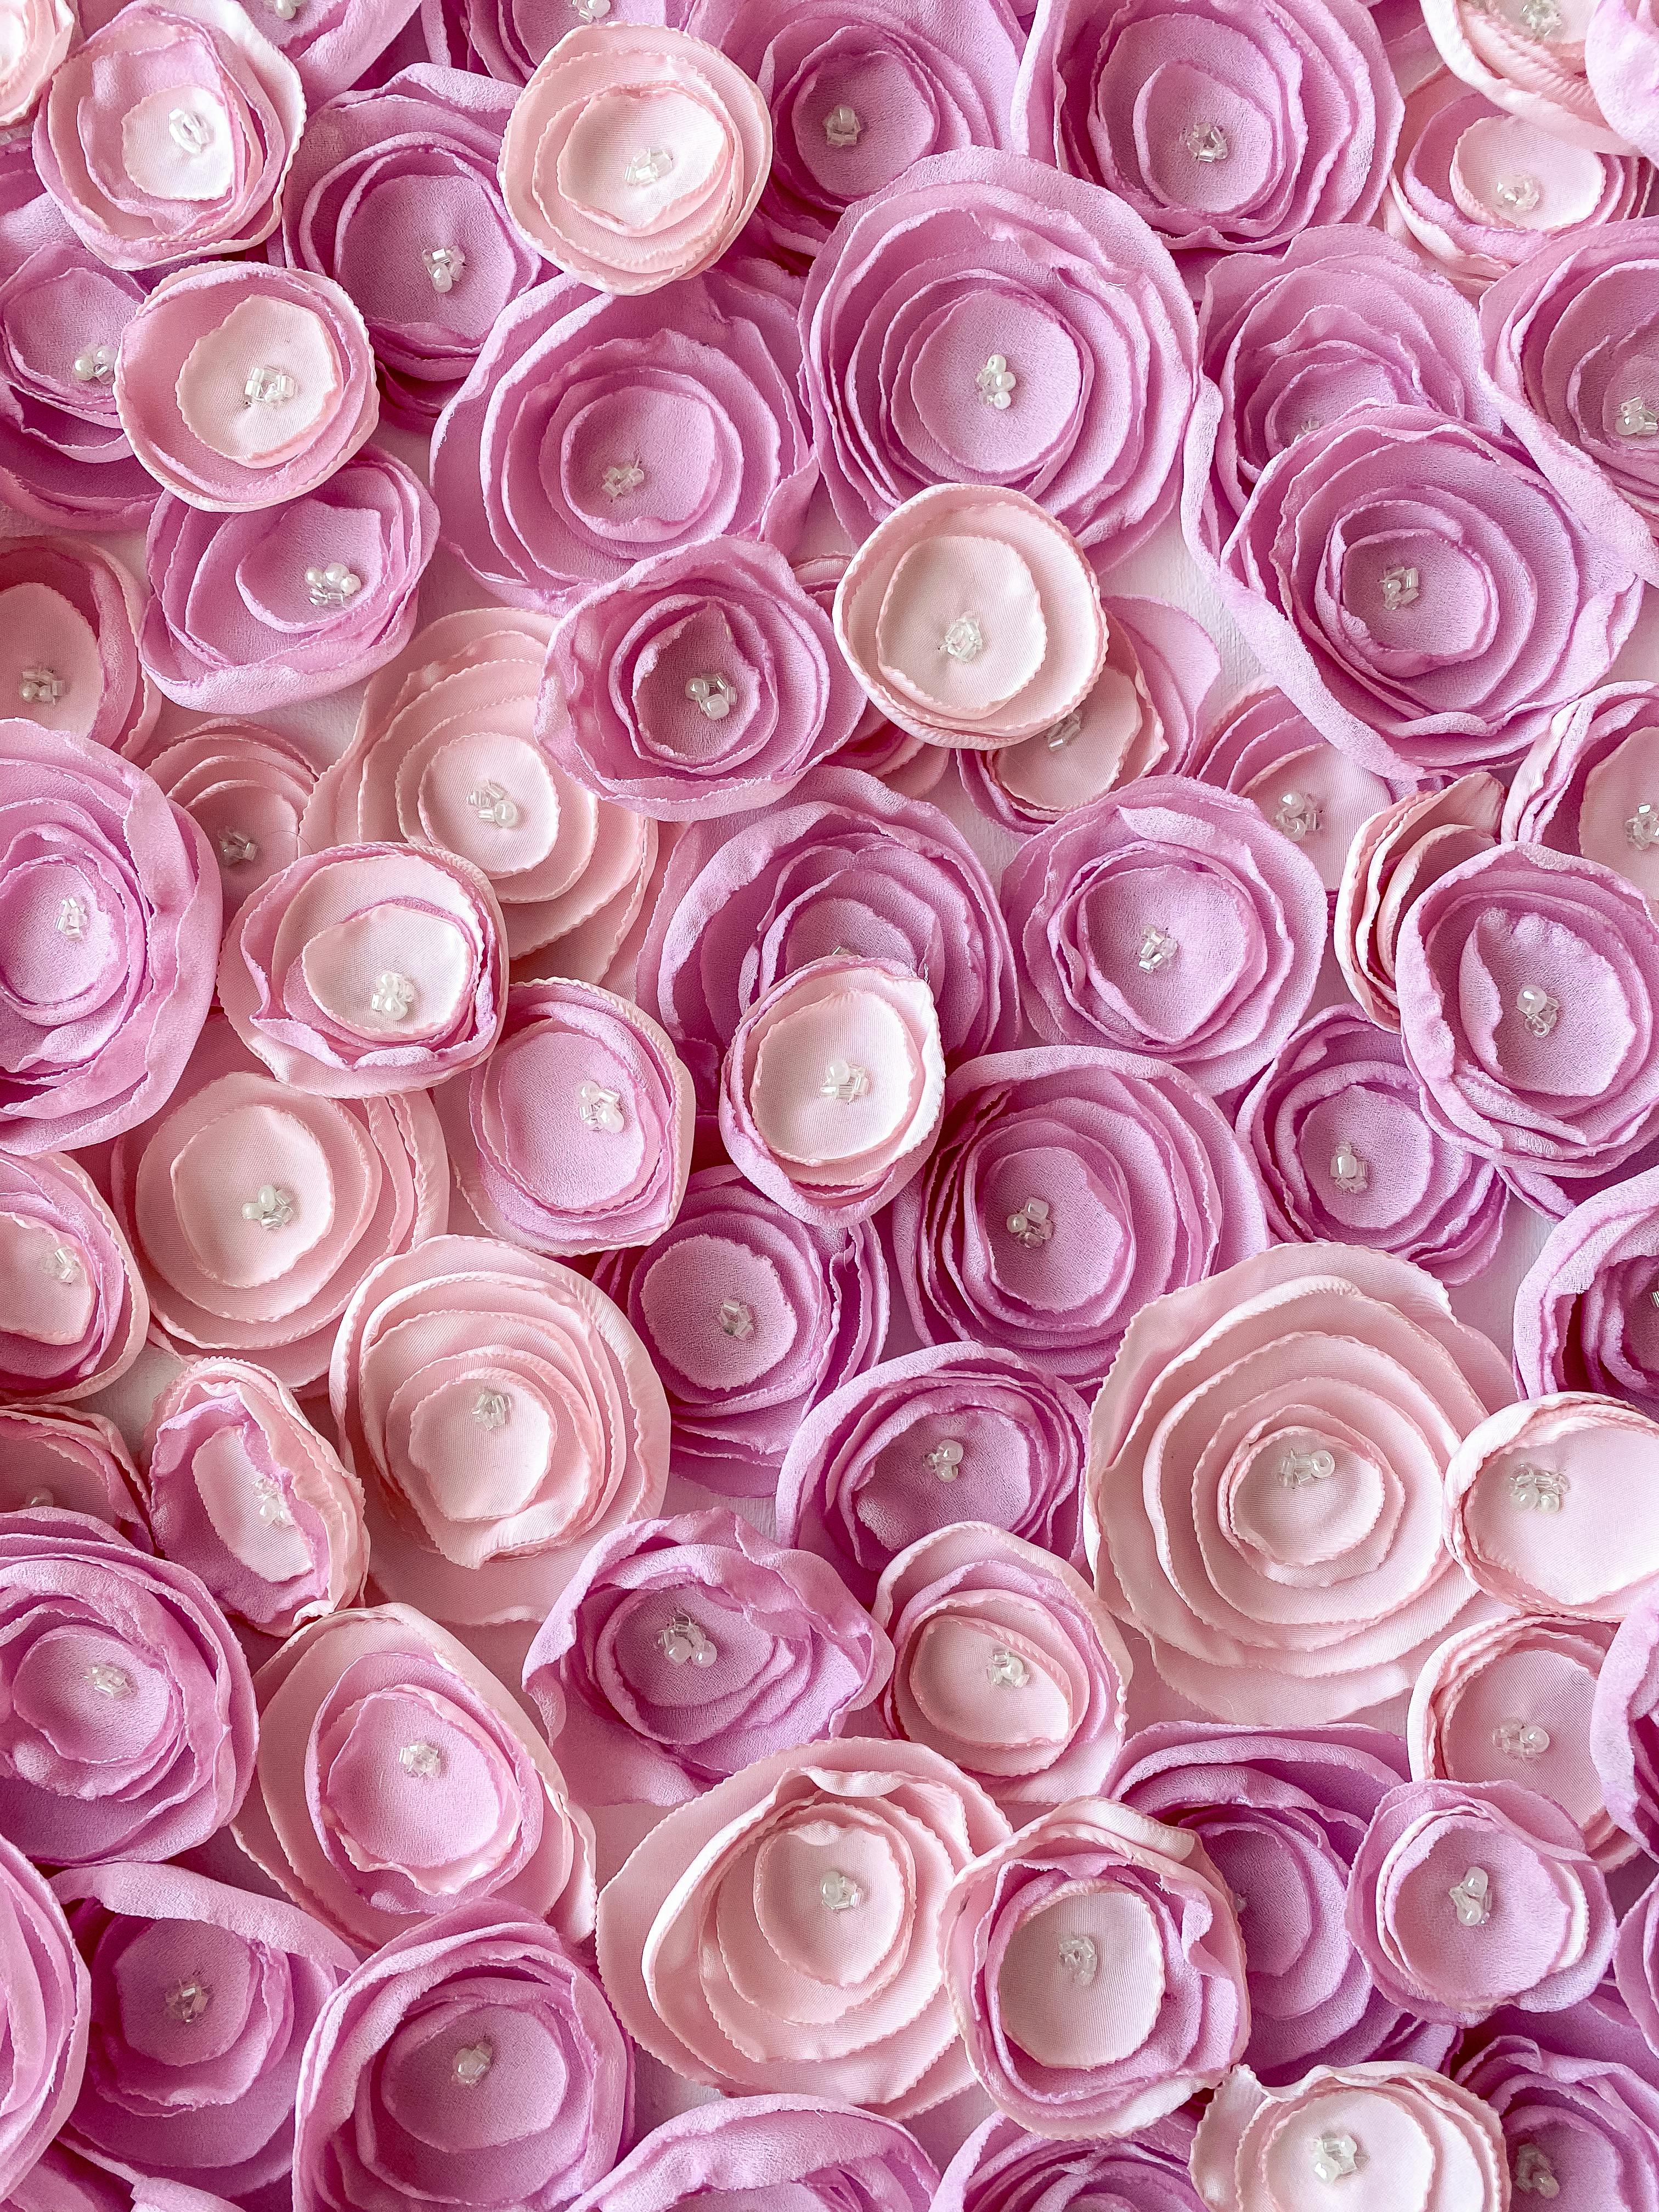 5 Floral iPhone Wallpapers To Celebrate 65k Pinterest Followers  Preppy  Wallpapers